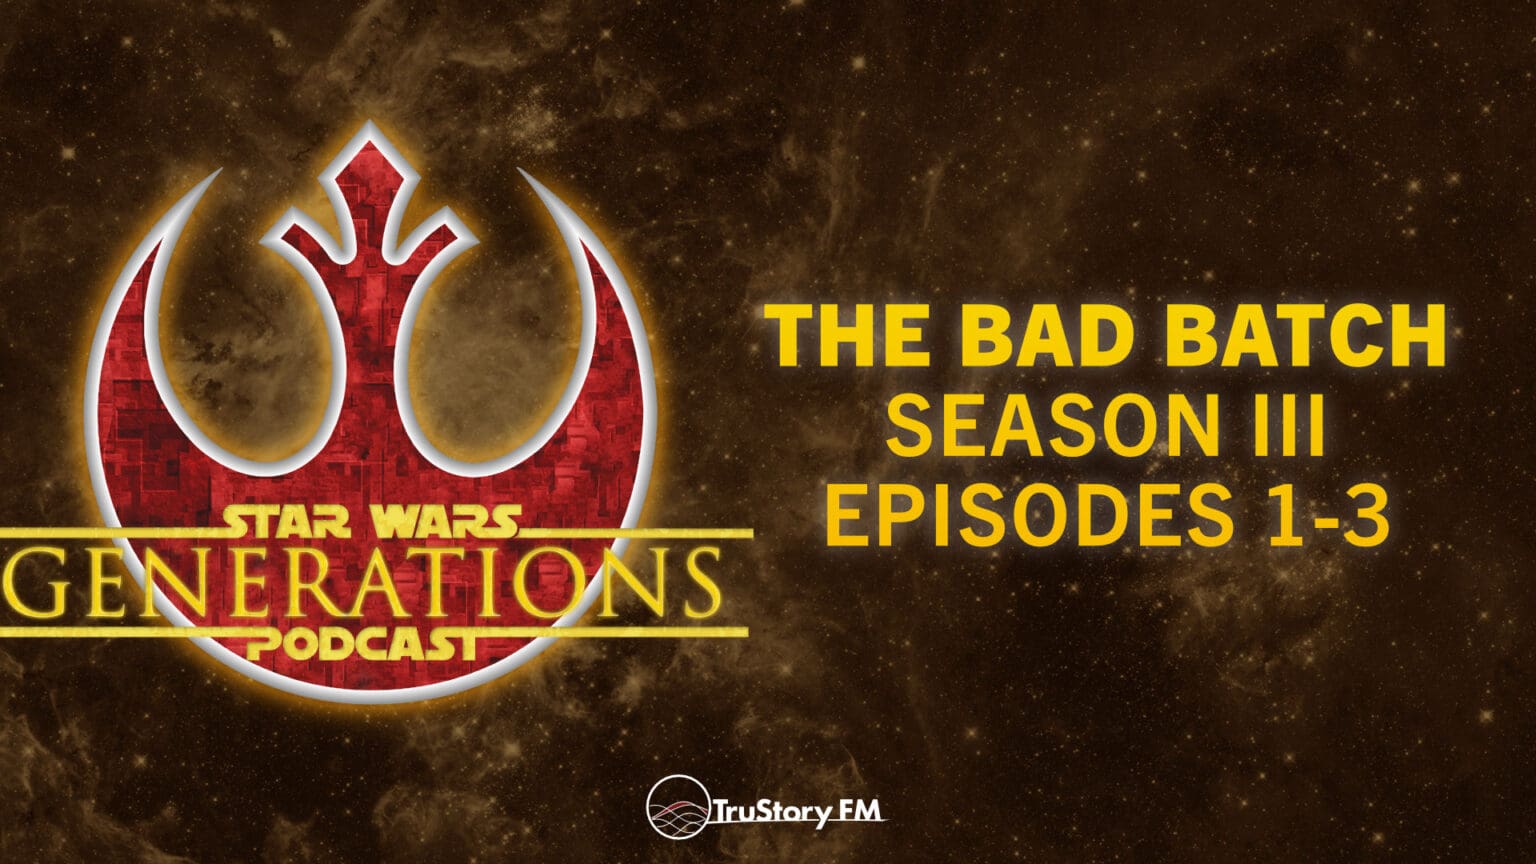 The Bad Batch • Season III, Episodes 1-3: ‘Confined’, ‘Paths Unknown’, ‘Shadows of Tantiss’ Star Wars Generations Episode 239